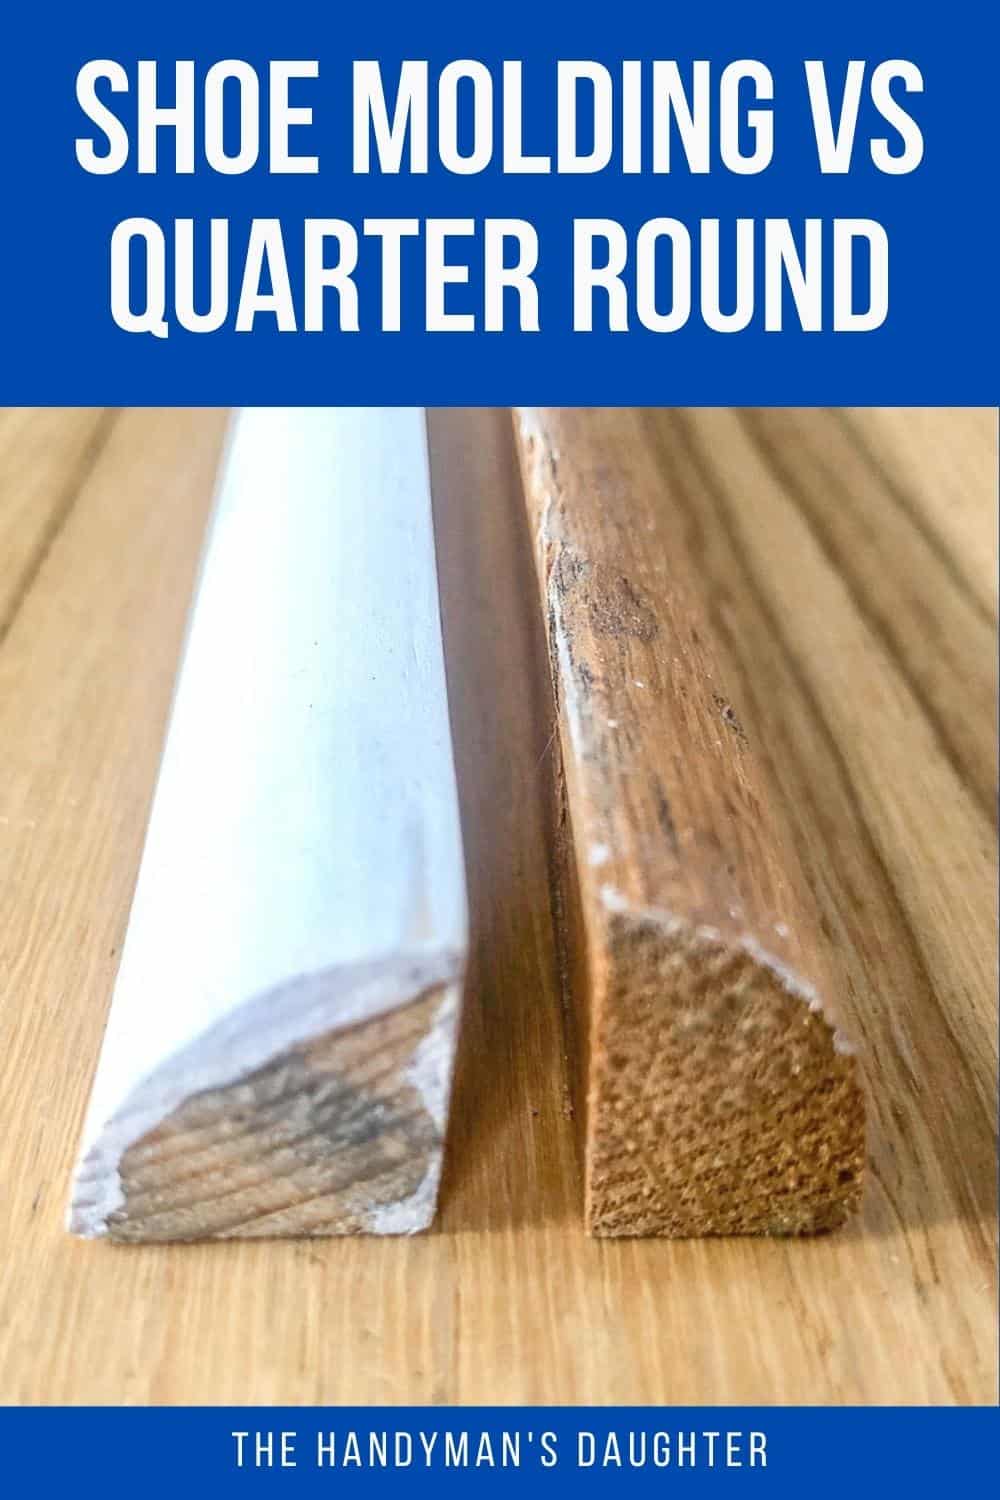 shoe molding vs quarter round comparison with text overlay